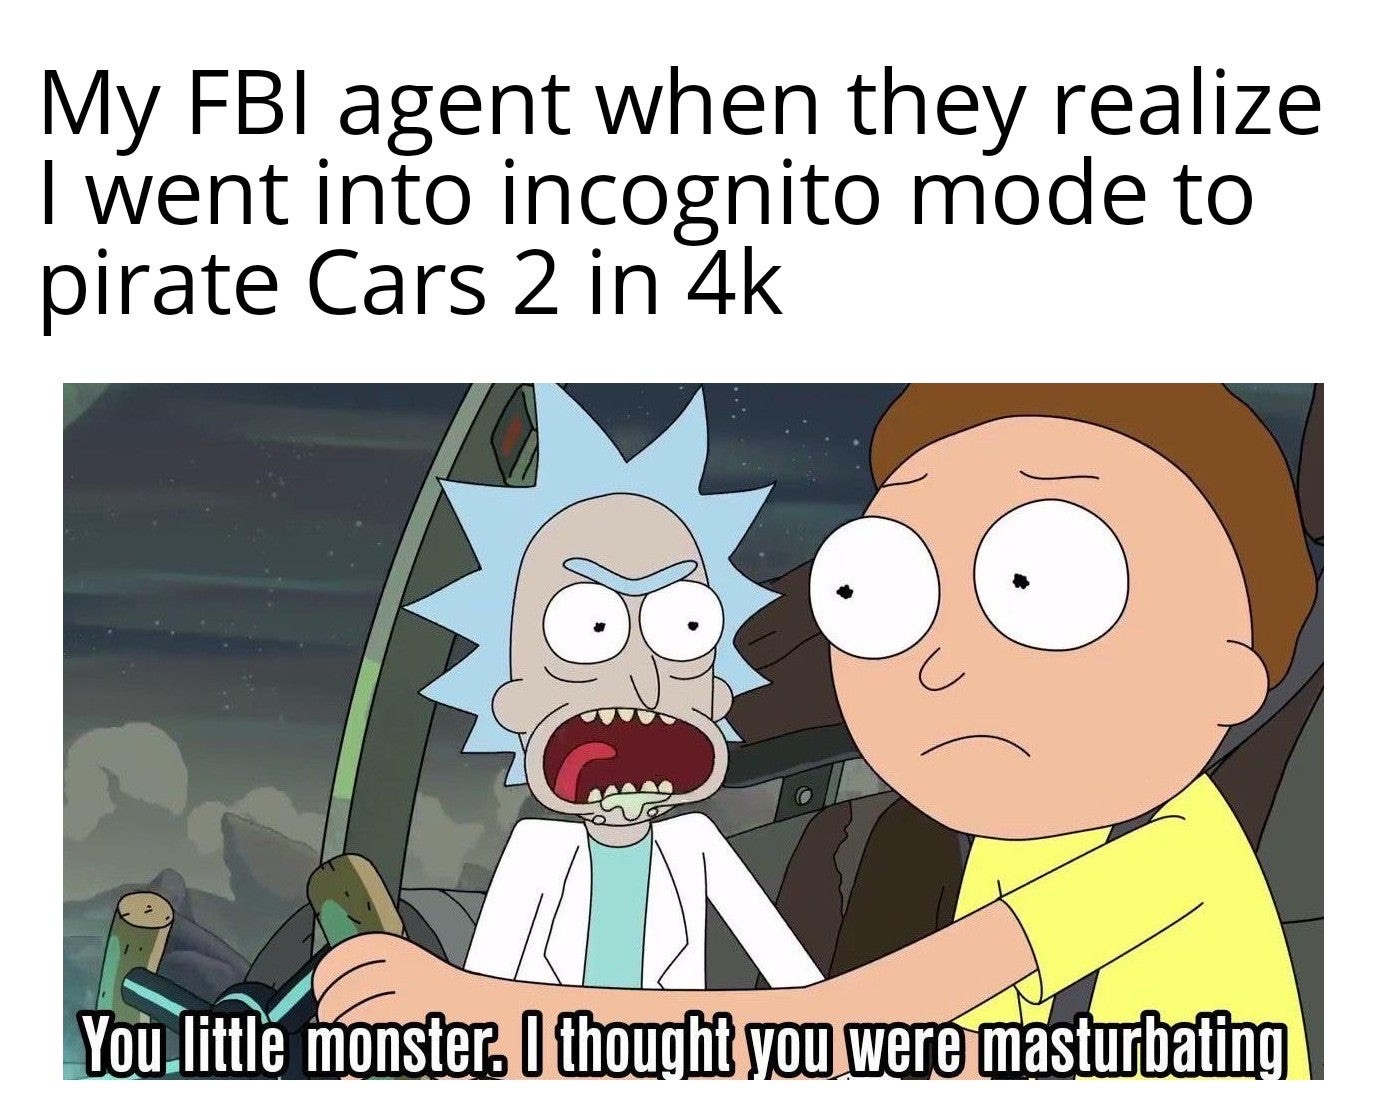 pornhub memes - My Fbi agent when they realize I went into incognito mode to pirate Cars 2 in 4k You.little monster. I thought you were masturbating